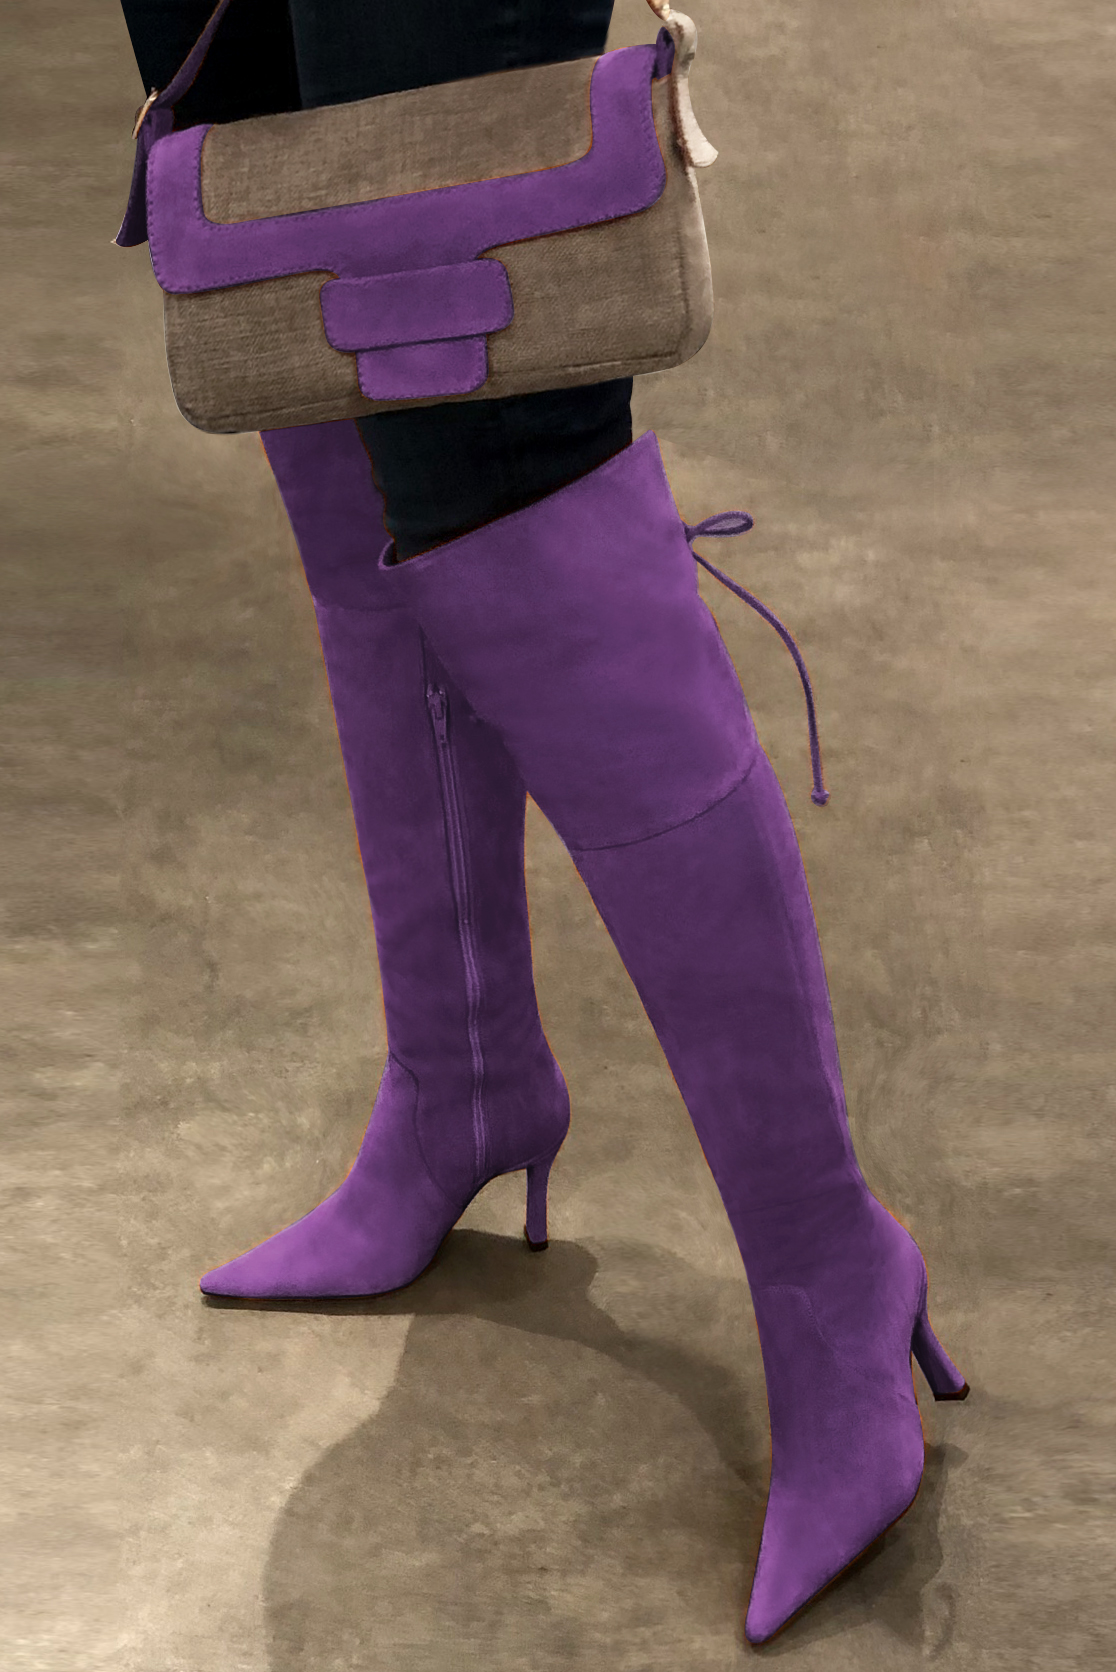 Amethyst purple women's leather thigh-high boots. Pointed toe. Very high spool heels. Made to measure. Worn view - Florence KOOIJMAN